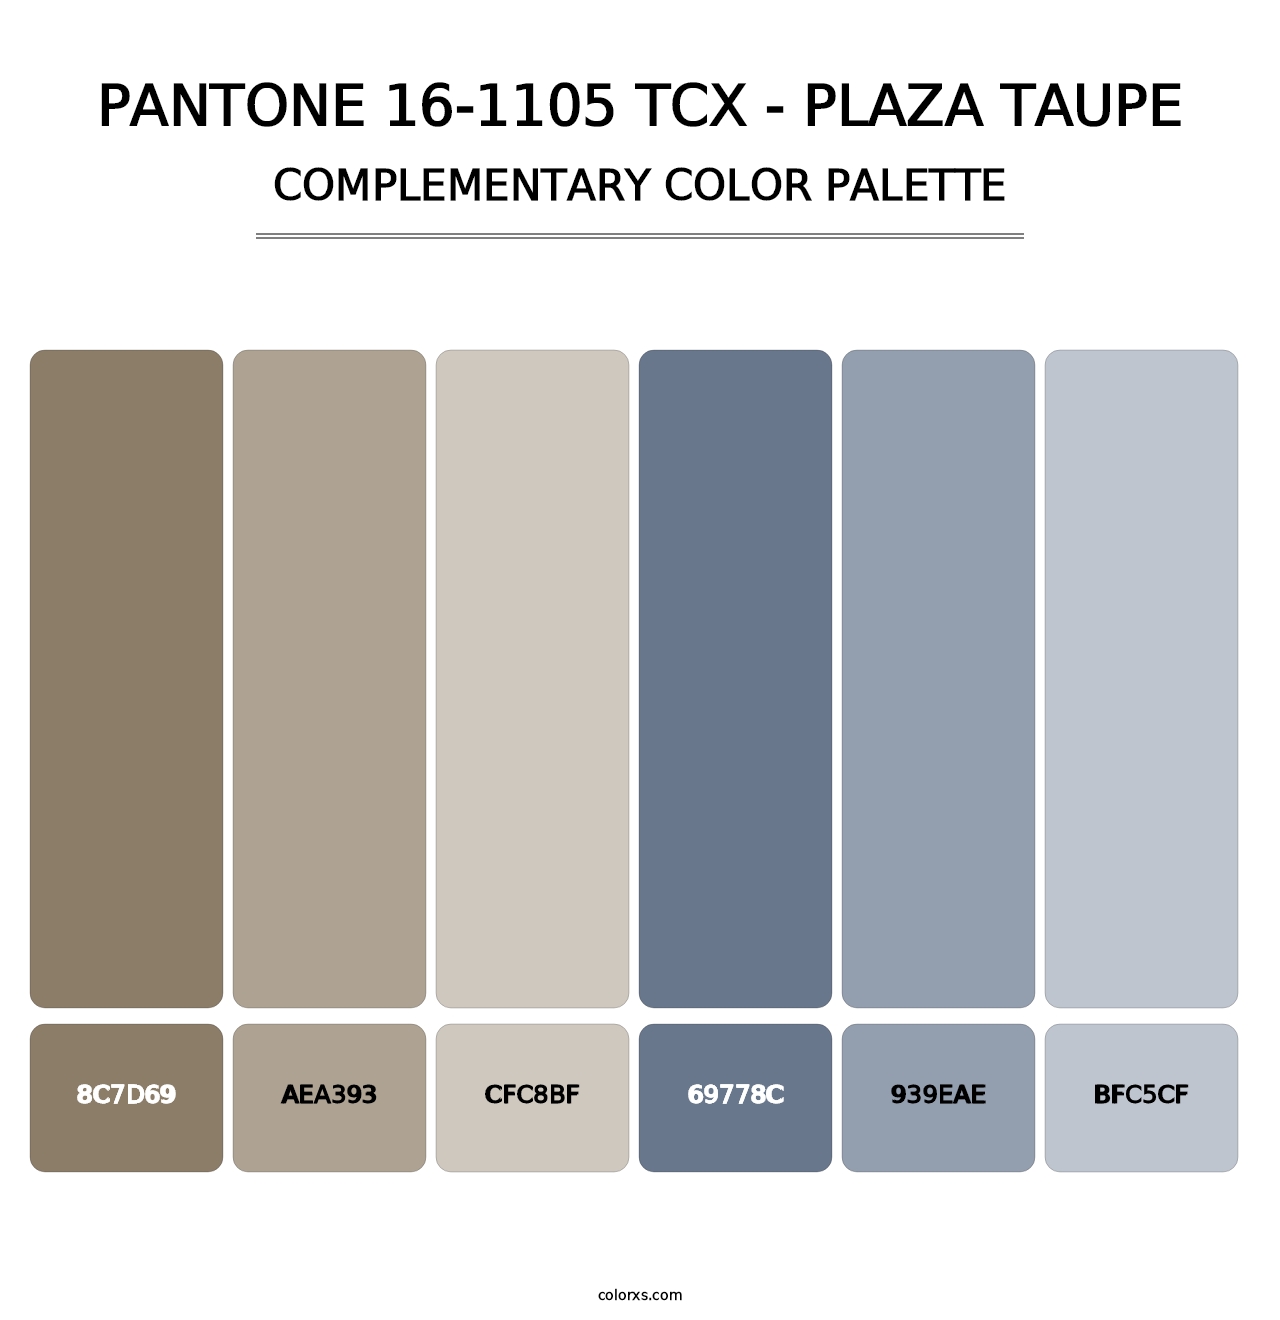 PANTONE 16-1105 TCX - Plaza Taupe - Complementary Color Palette